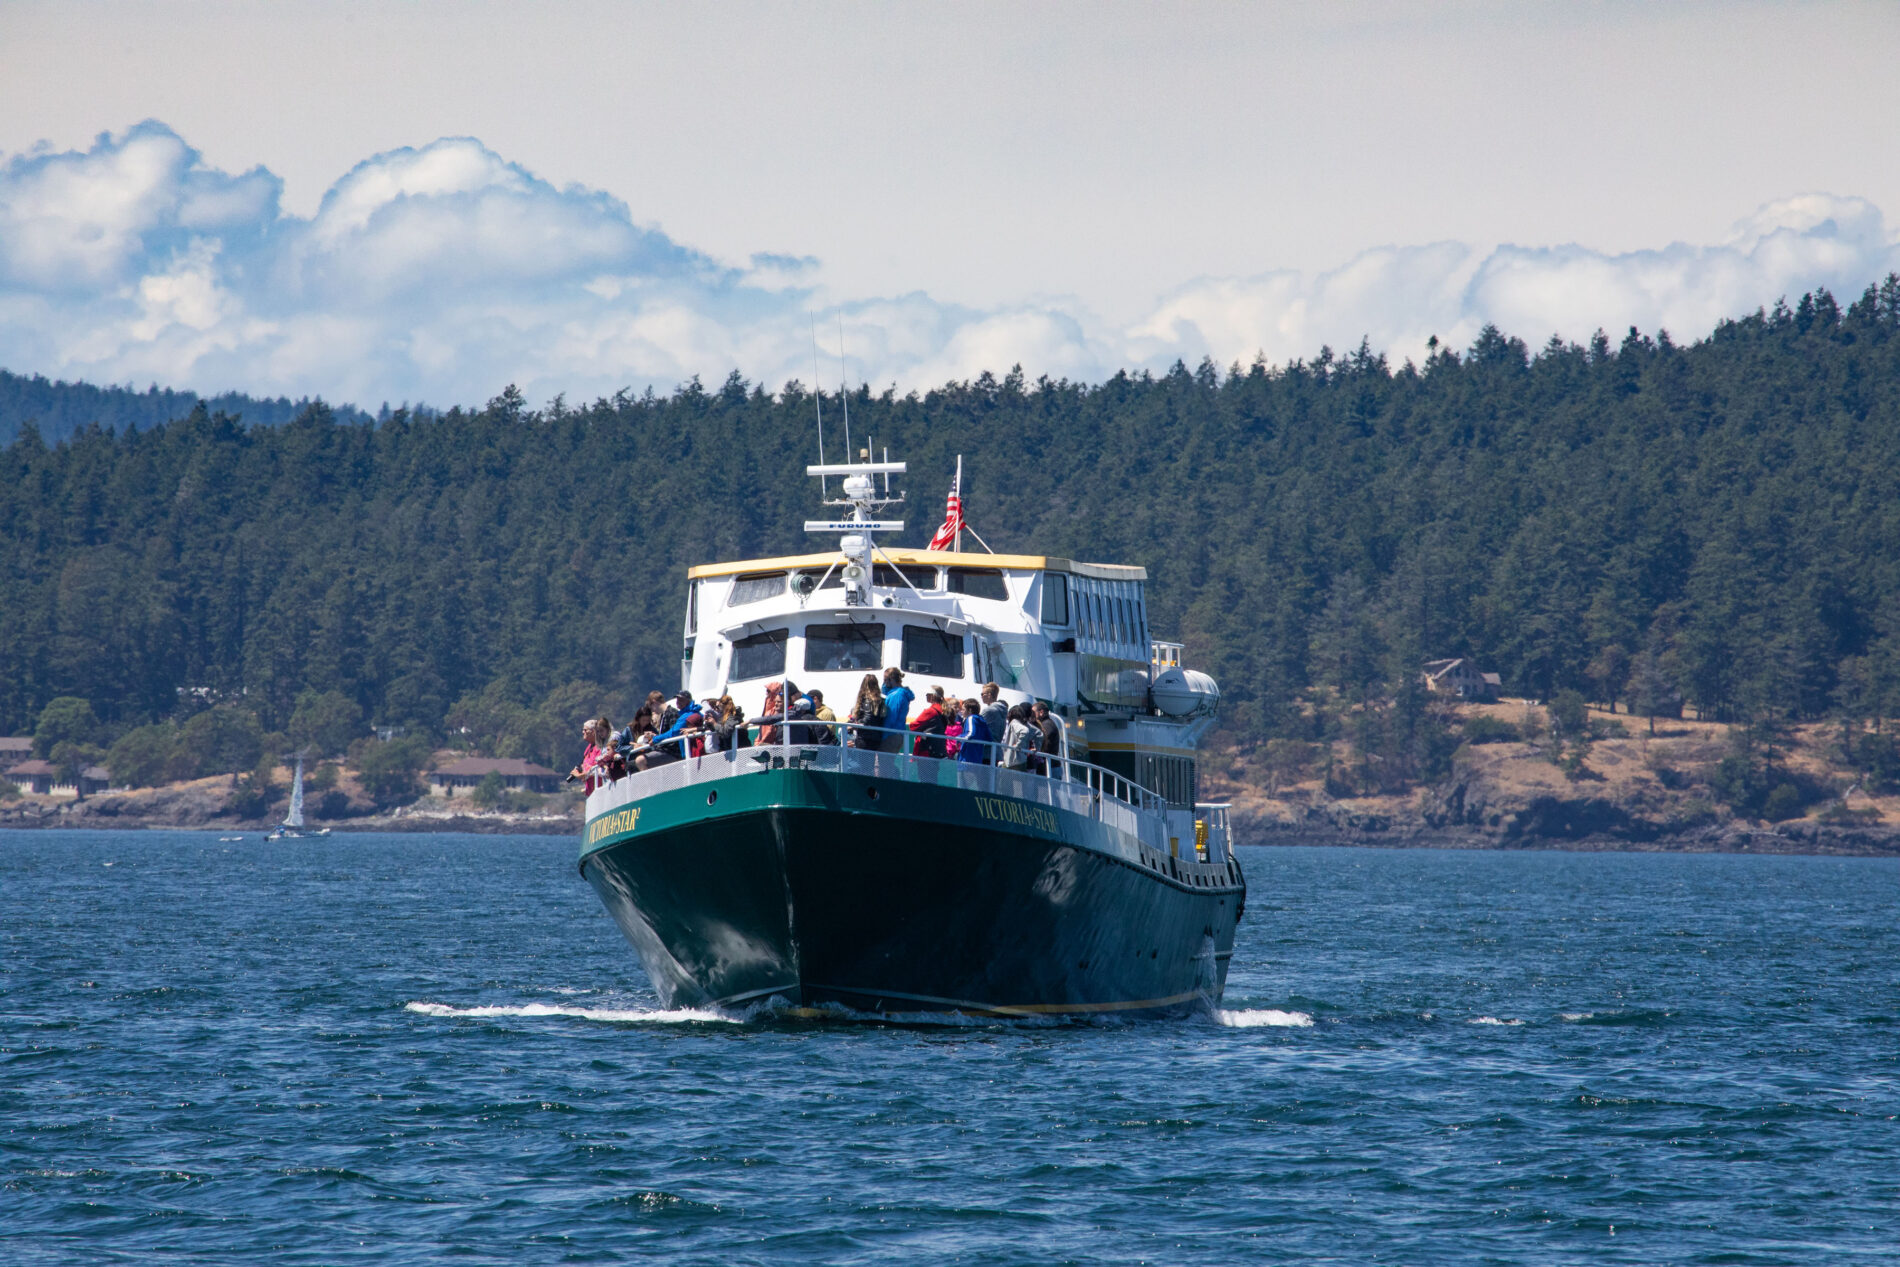 Whale watching cruises leave frequently out of Friday Harbor. This is one of the bigger boats, but there are options for everyone's needs and wants.